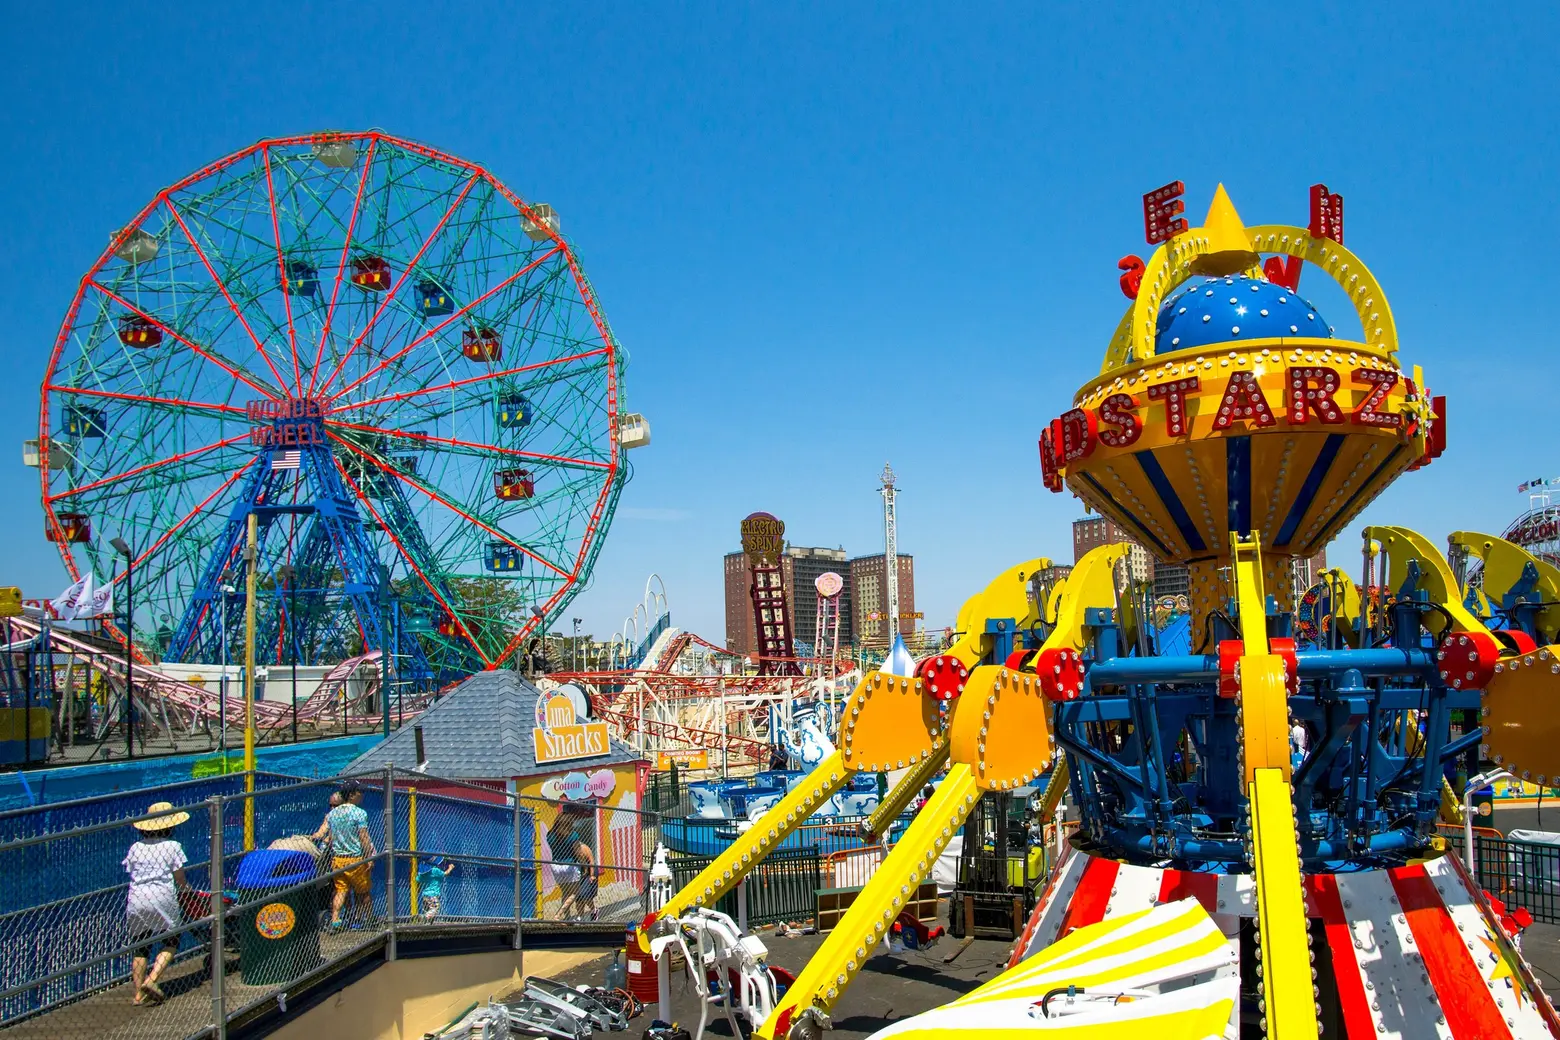 Celebrate Coney Island’s history with free events at Deno’s Wonder Wheel Park this Saturday